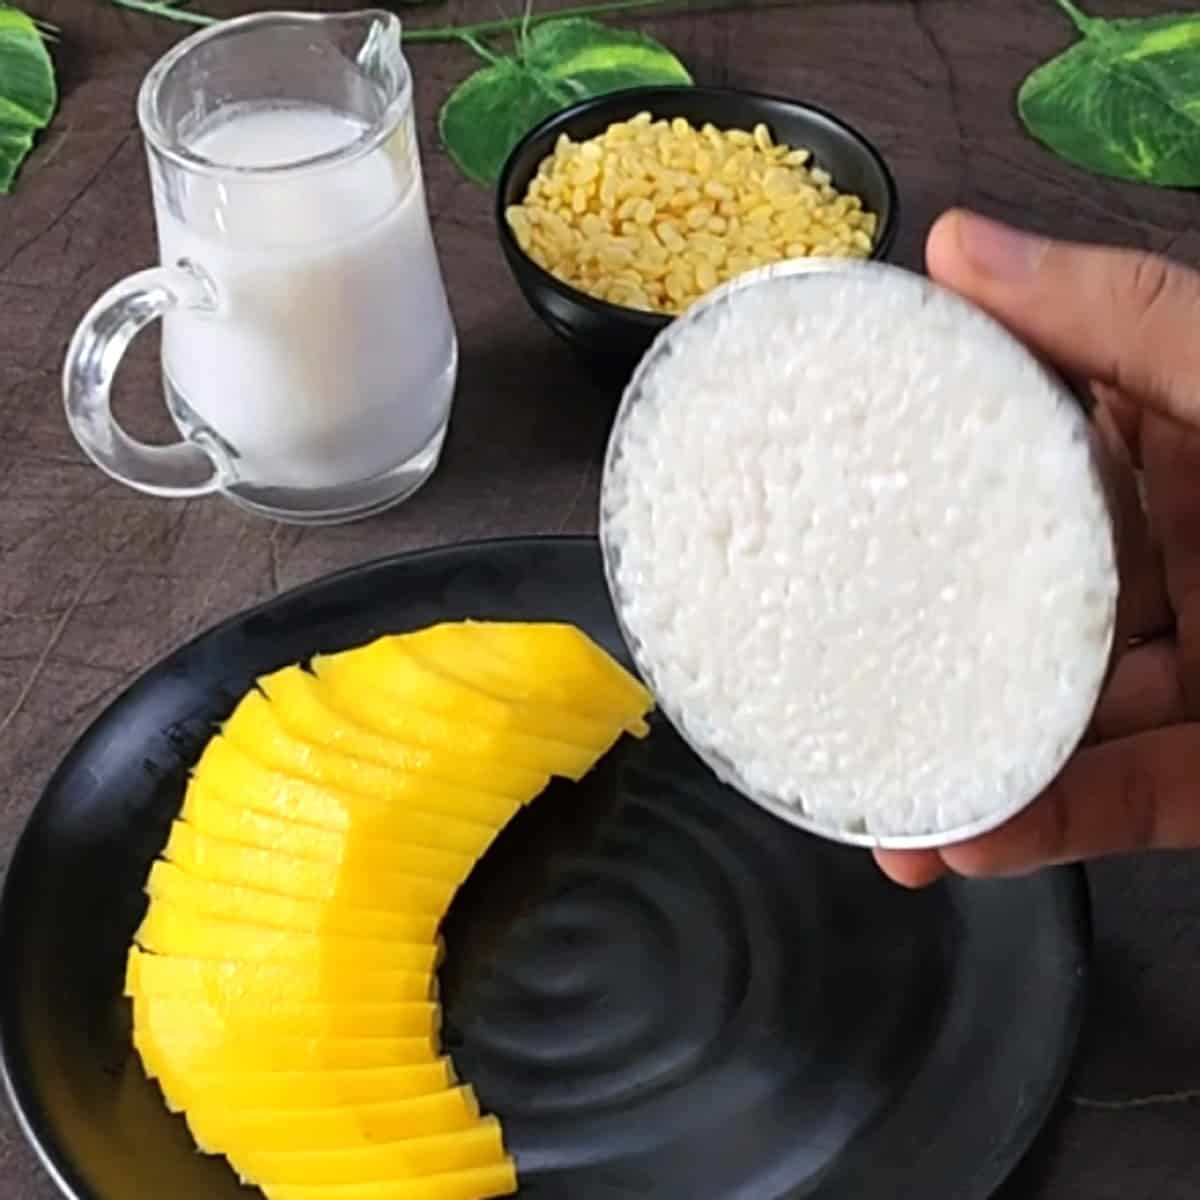 Transfer a small bowl of sticky rice to a black plate containing sliced mangoes. 